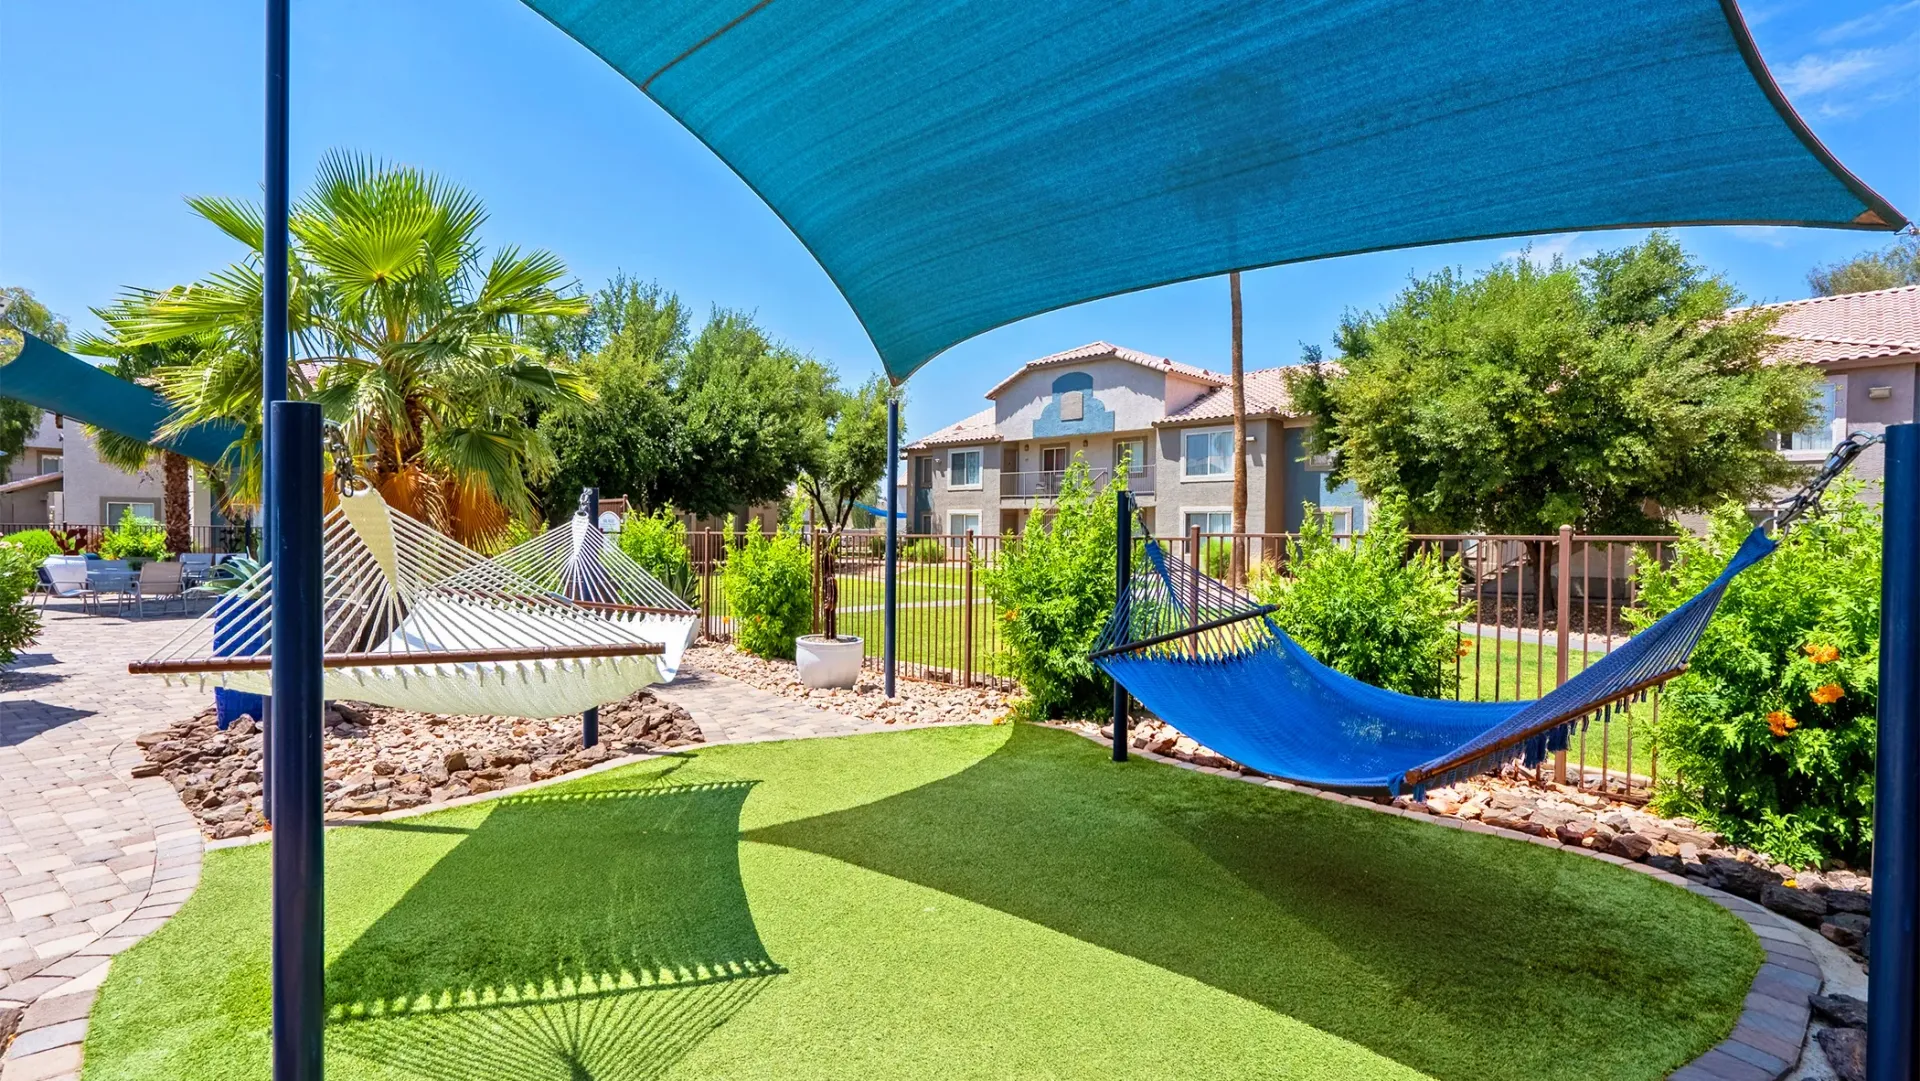 A patch of Astroturf with two hammocks hanging over, with a shade above